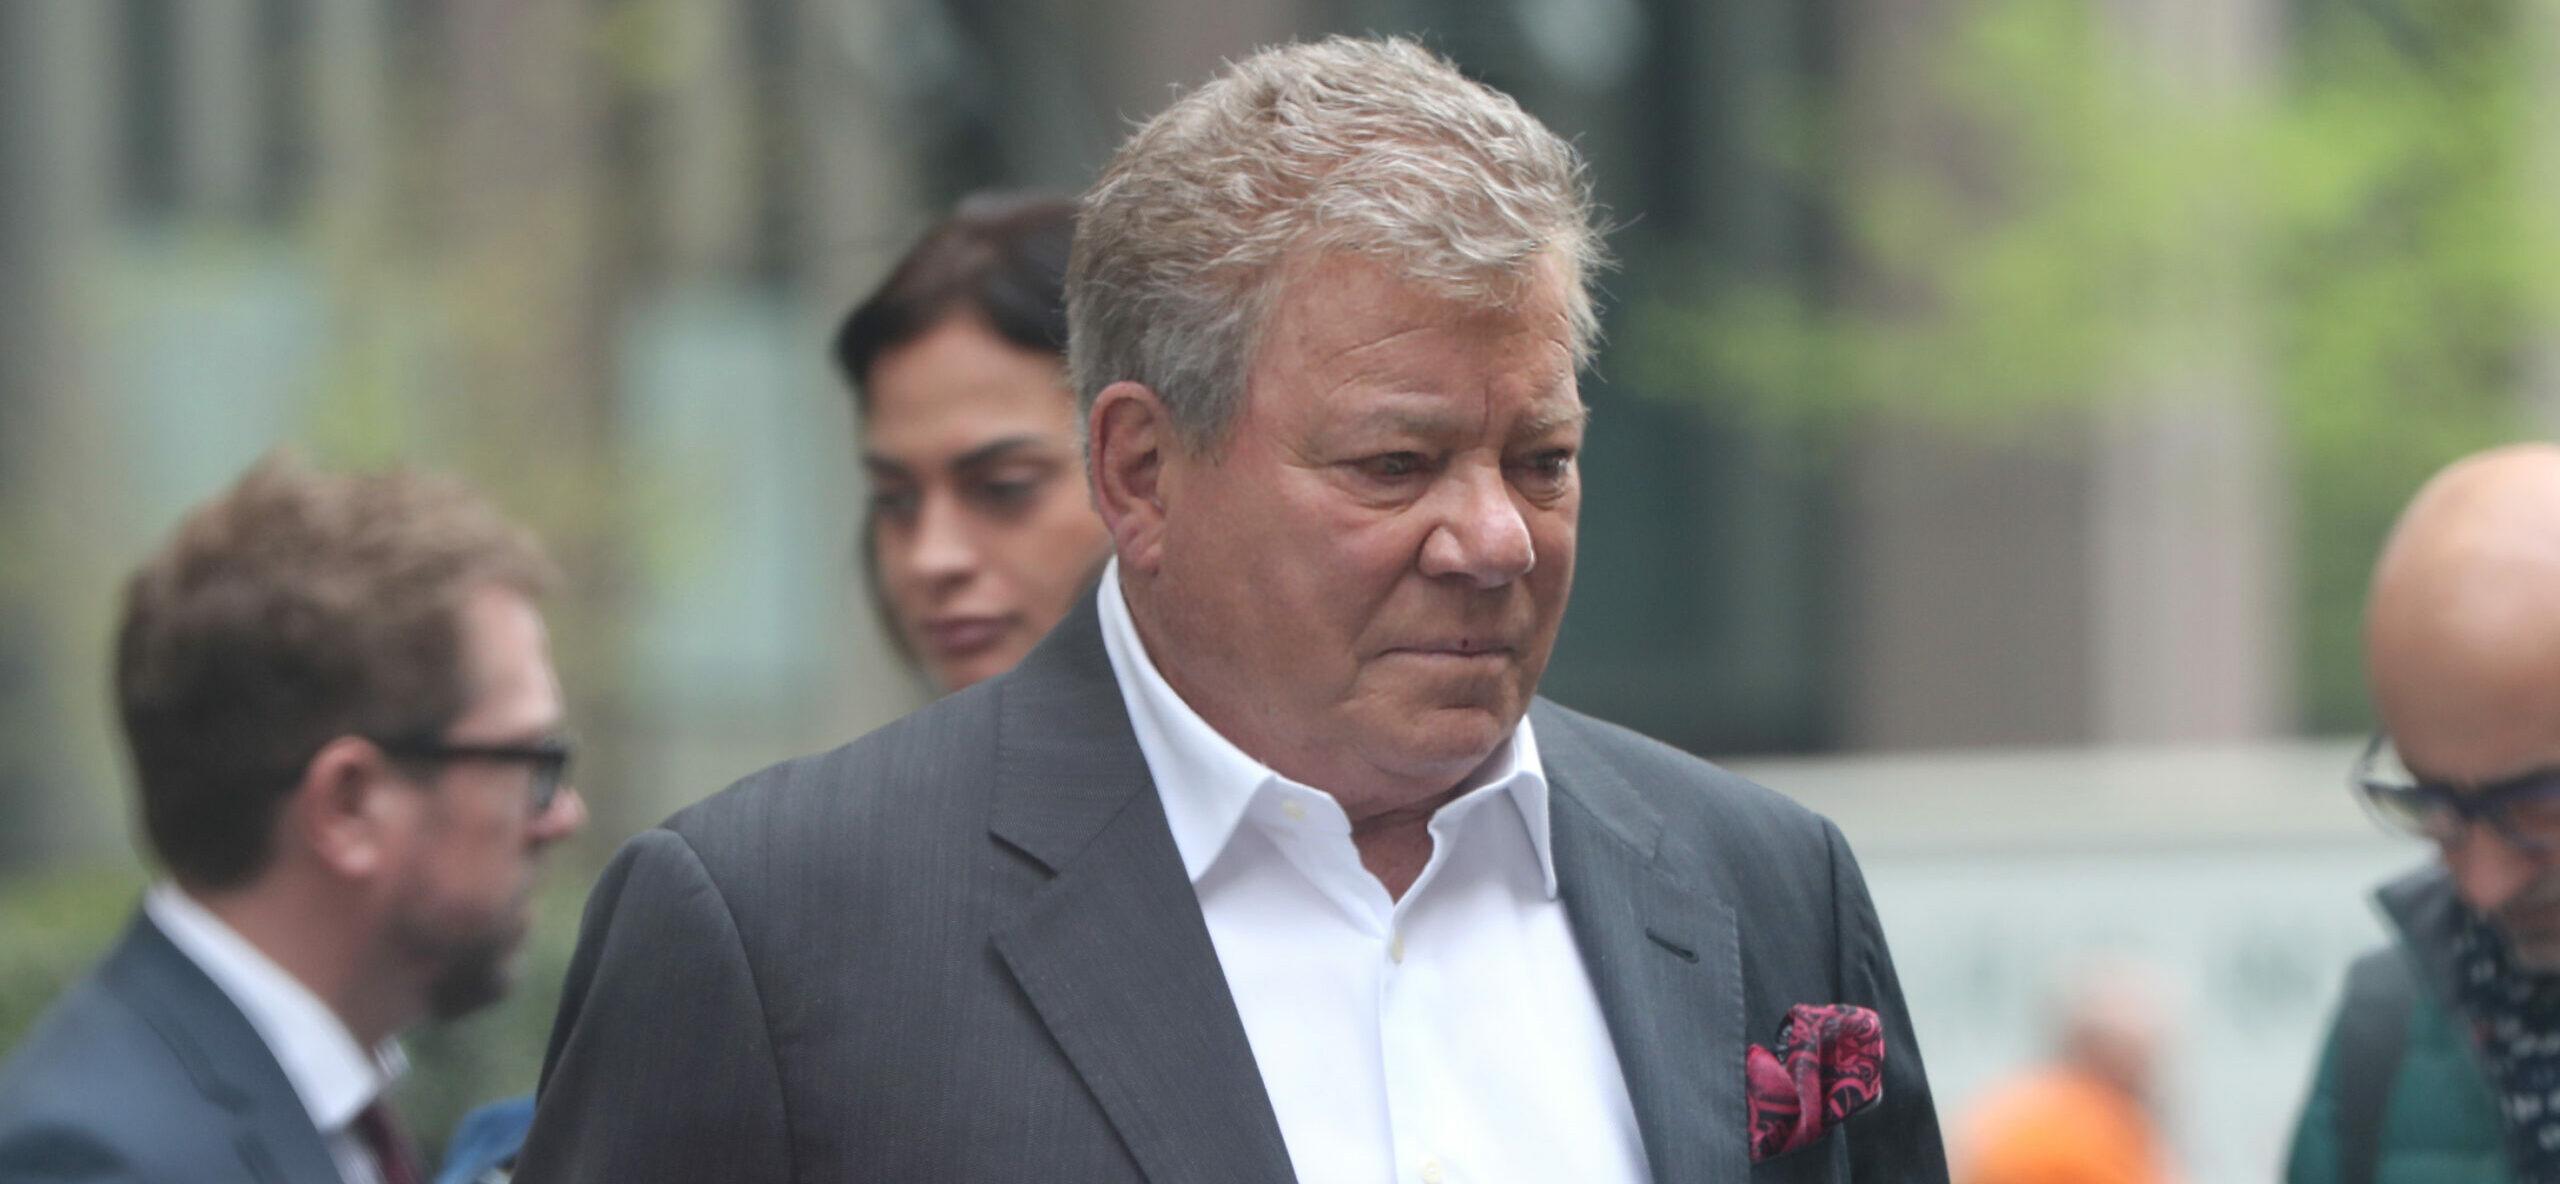 William Shatner spotted in New York